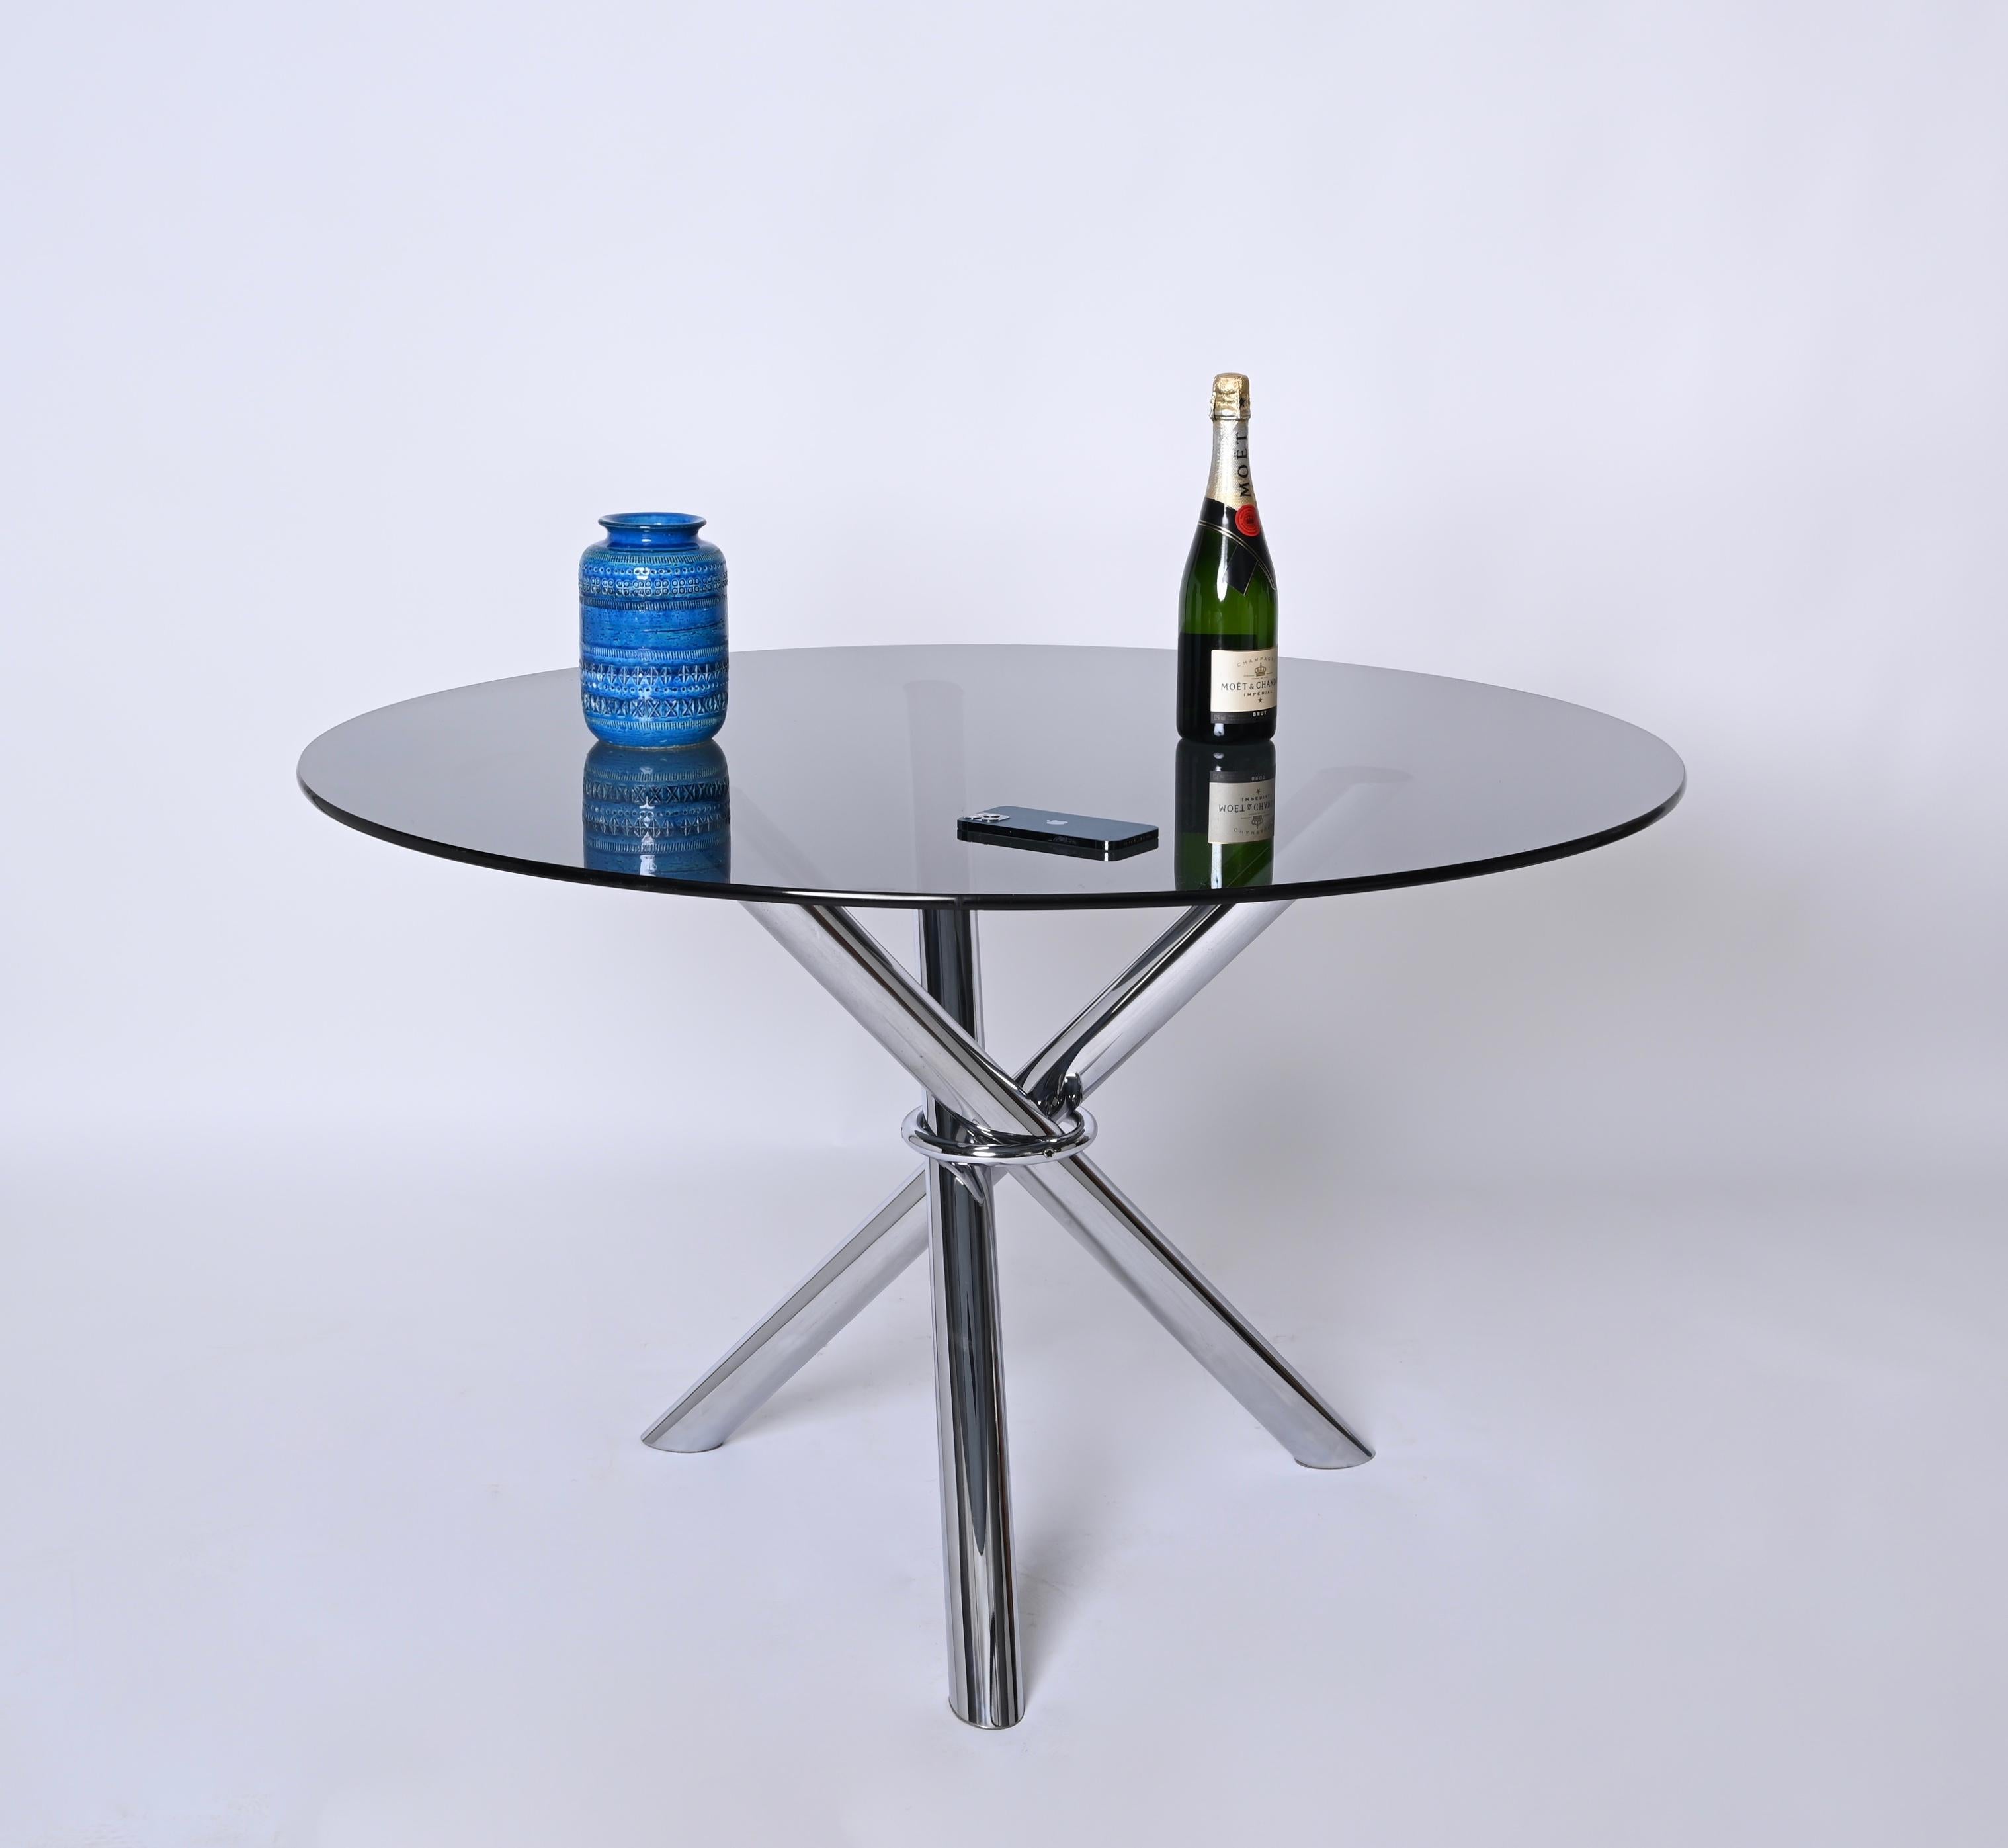 Italian Mid-Century Dining Table, Chromed Stainless Steel with Smoked Glass, Italy 1970s For Sale